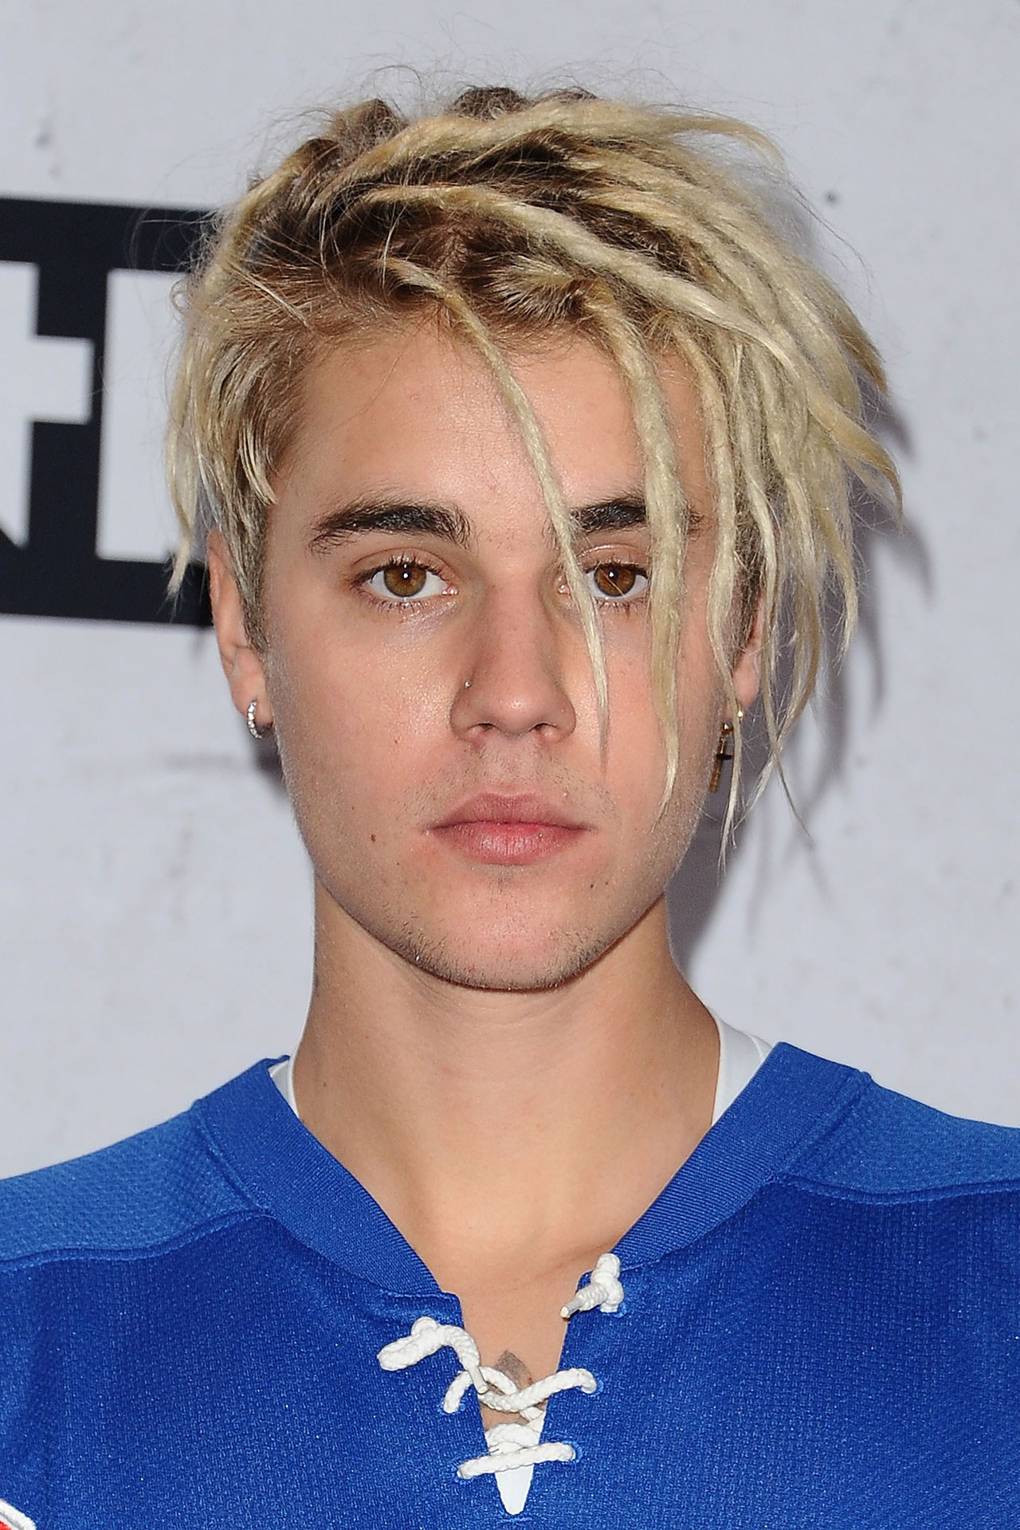 justin bieber's best hairstyles - hair styles over the years